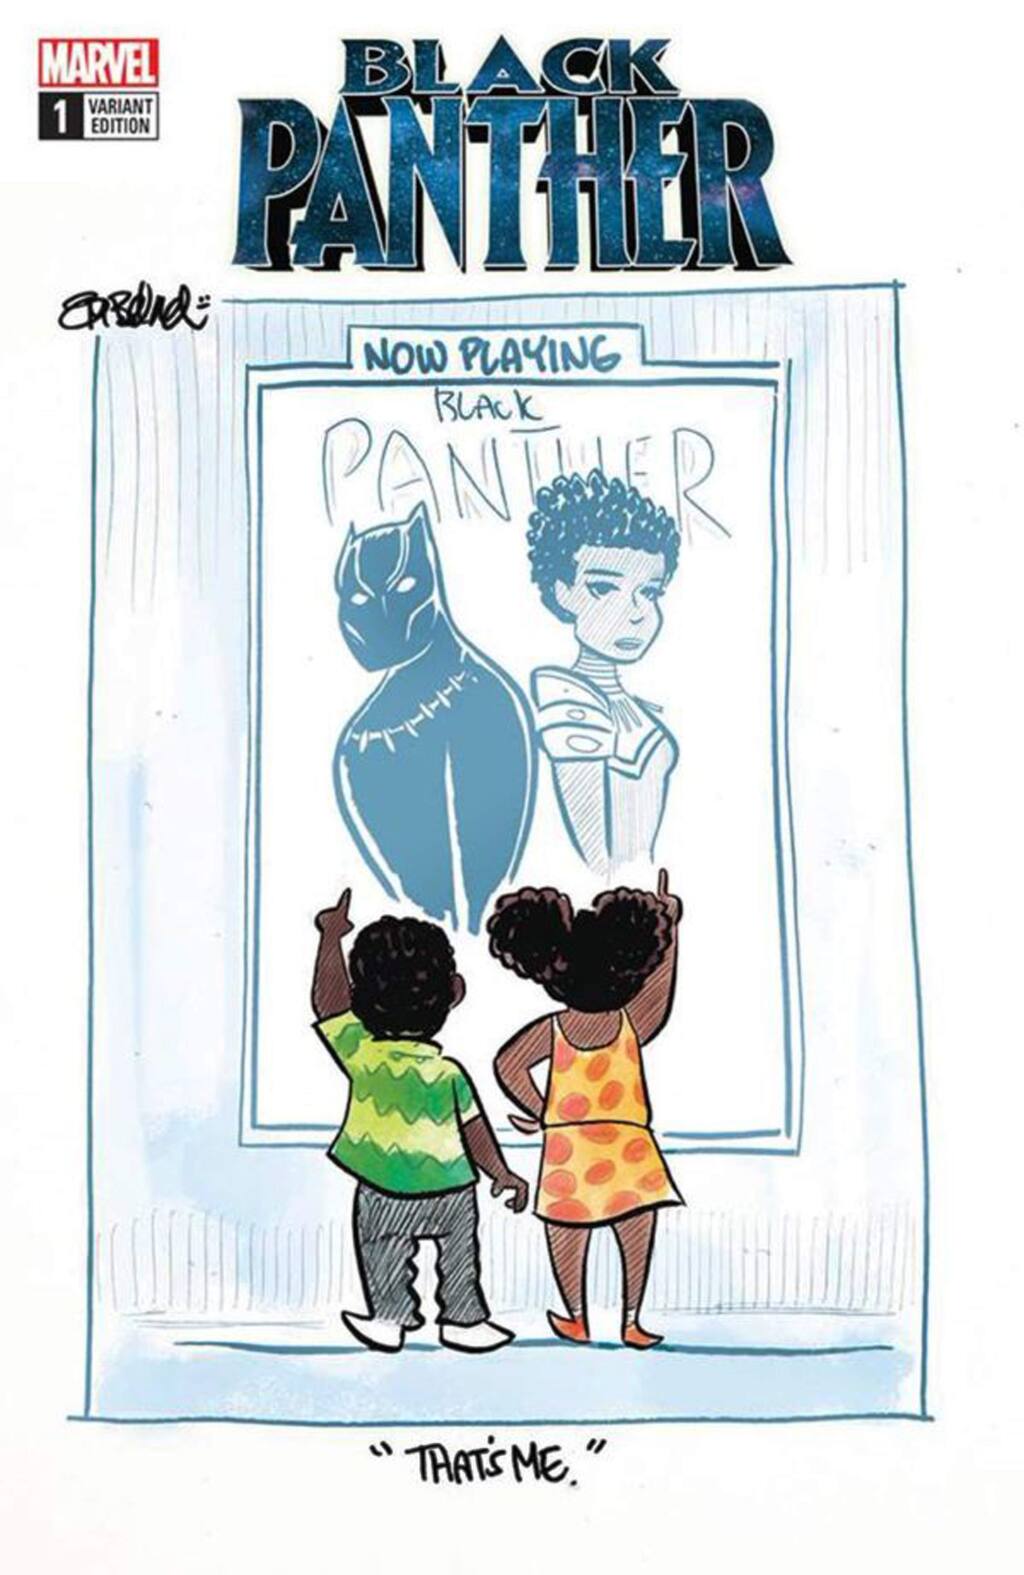 Cartoonist Tom Beland posted this cartoon on the release of 'Black Panther,' focusing on the self-identification aspects of the movie and the importance of representation. (comicsbeat.com)